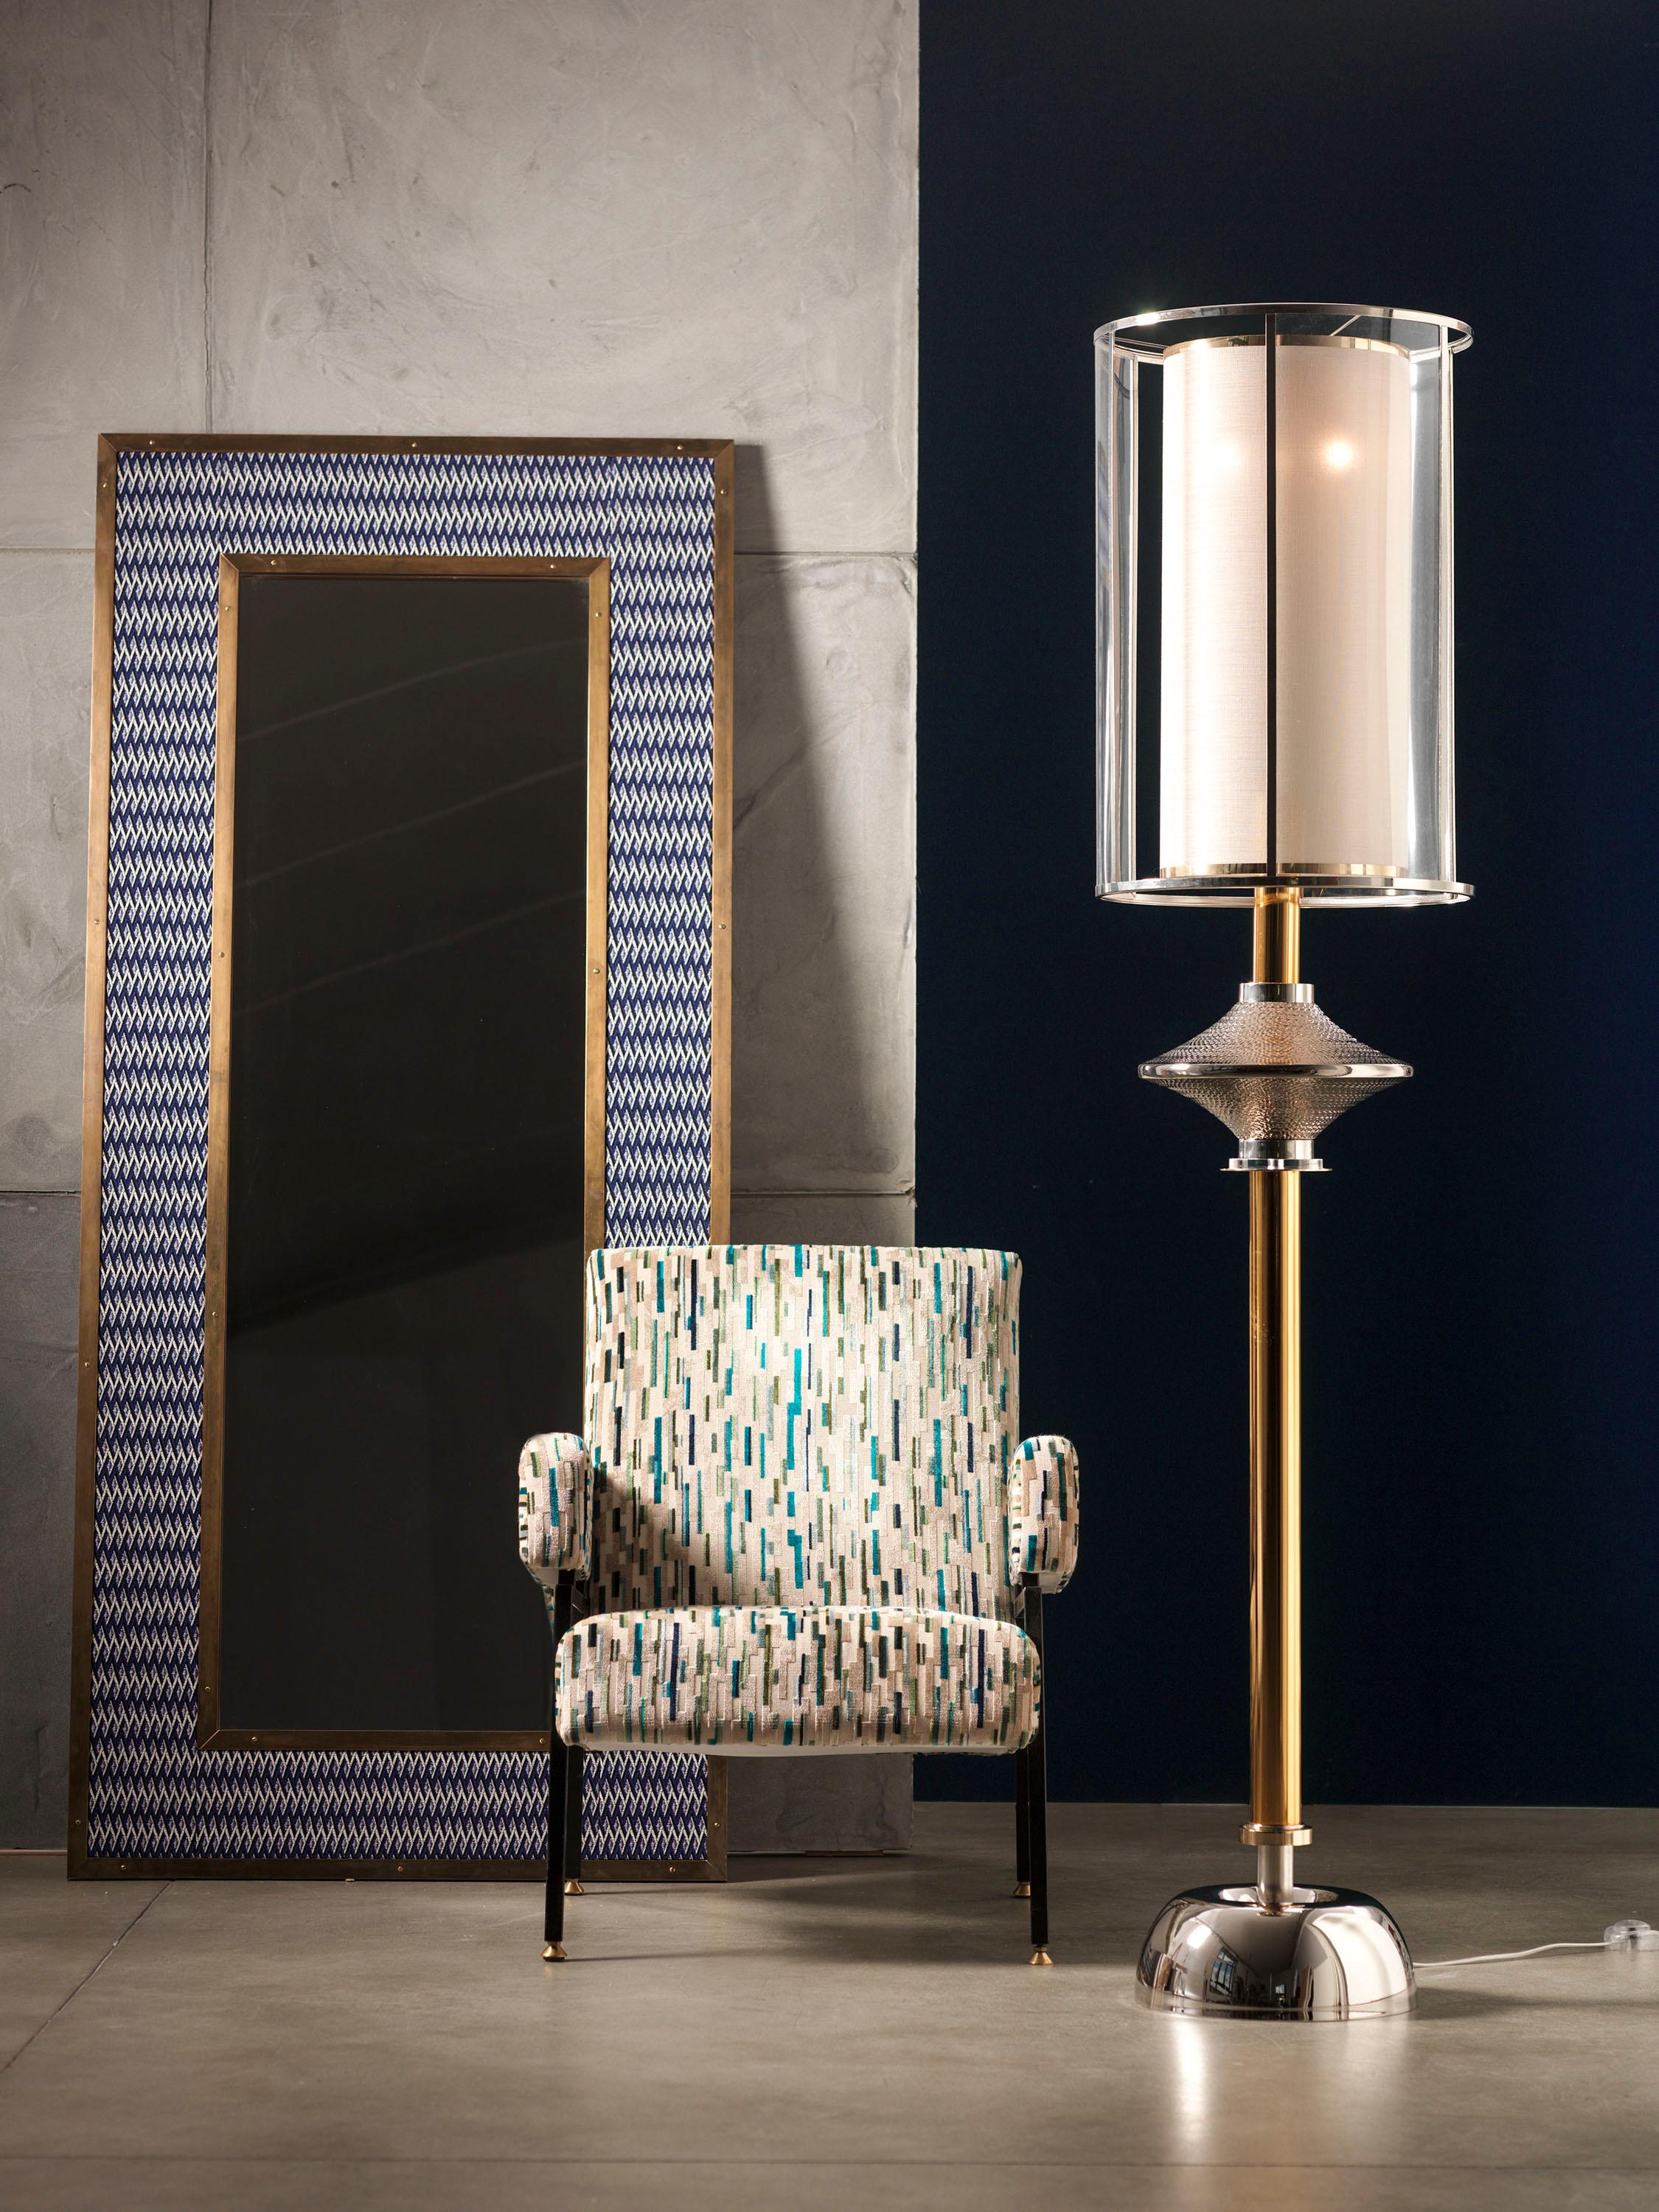 Standing lamp in golden and nickel brass with central part in Majolica engraved and platinum-plated. The nickel brass lampshade is composed by Plexiglas; the internal lampshade is in gold laminate fabric.